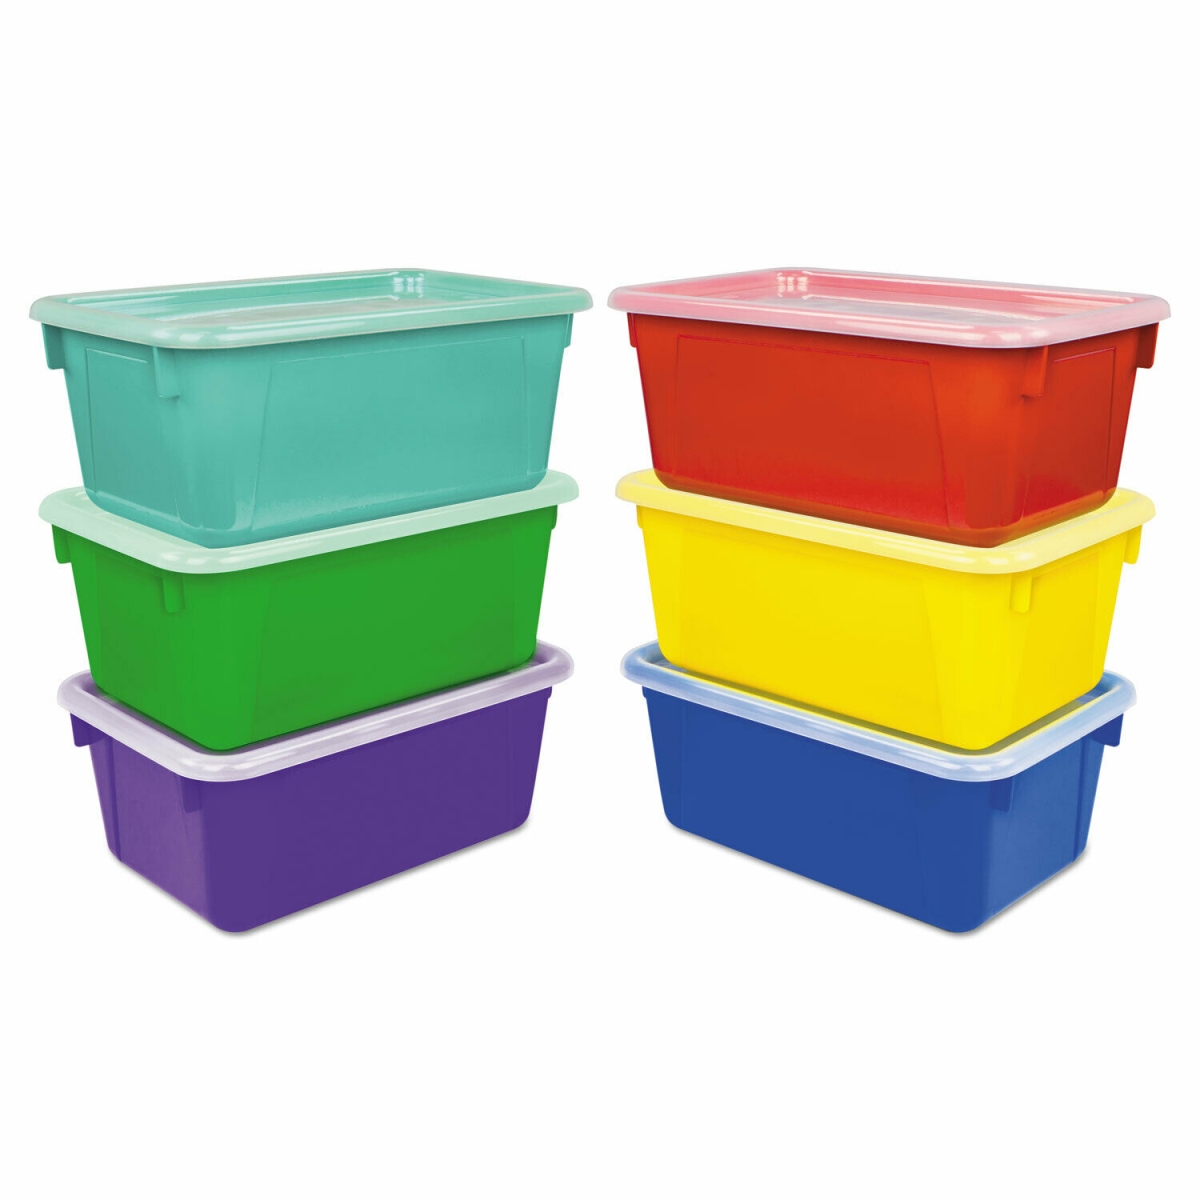 62406e06c Assorted Cubby Bins - Pack Of 6